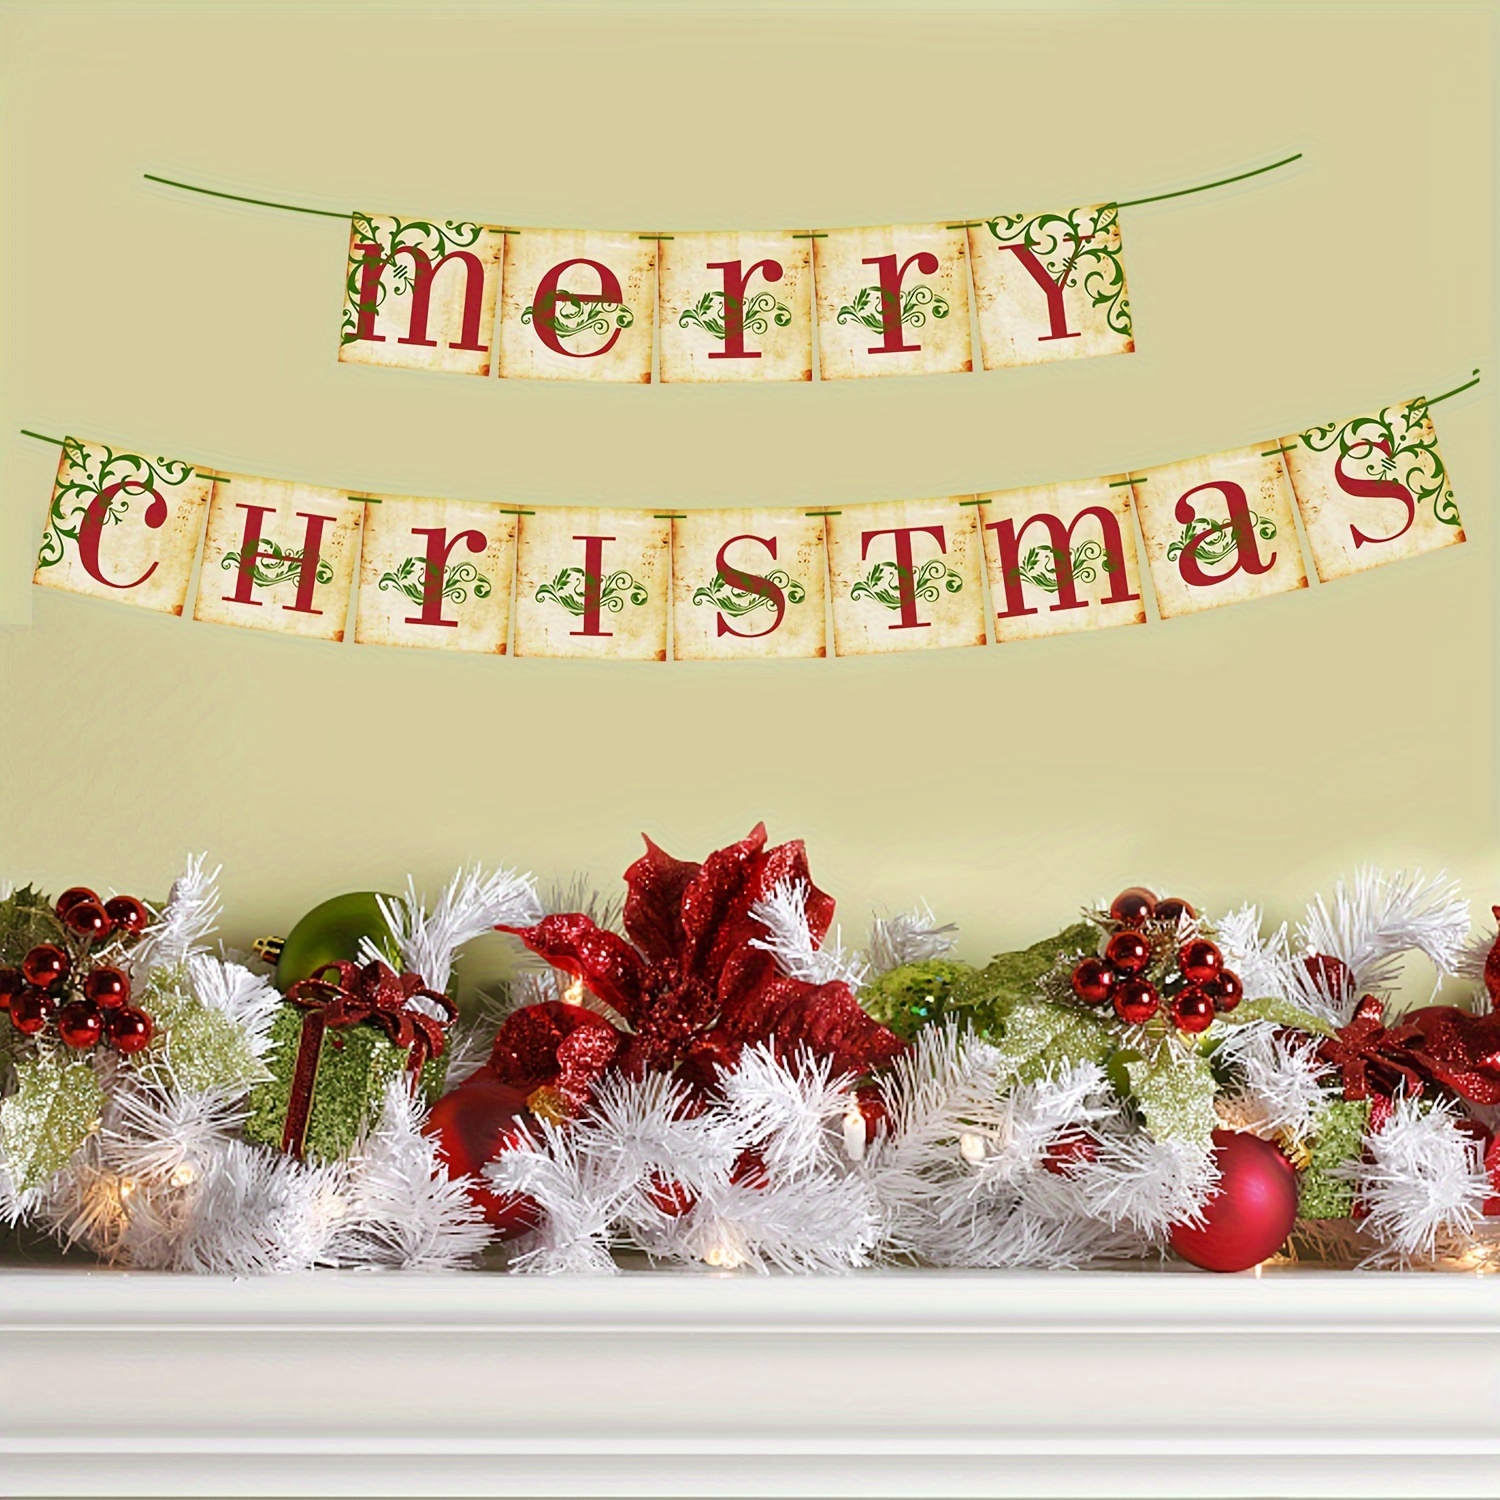  Christmas Decorations - Vintage Merry Christmas Banner - Retro  Nostalgic Traditional Old Fashioned Victorian Xmas Holiday Decor for Indoor  Home Office Fireplace Mantle Farmhouse : Home & Kitchen